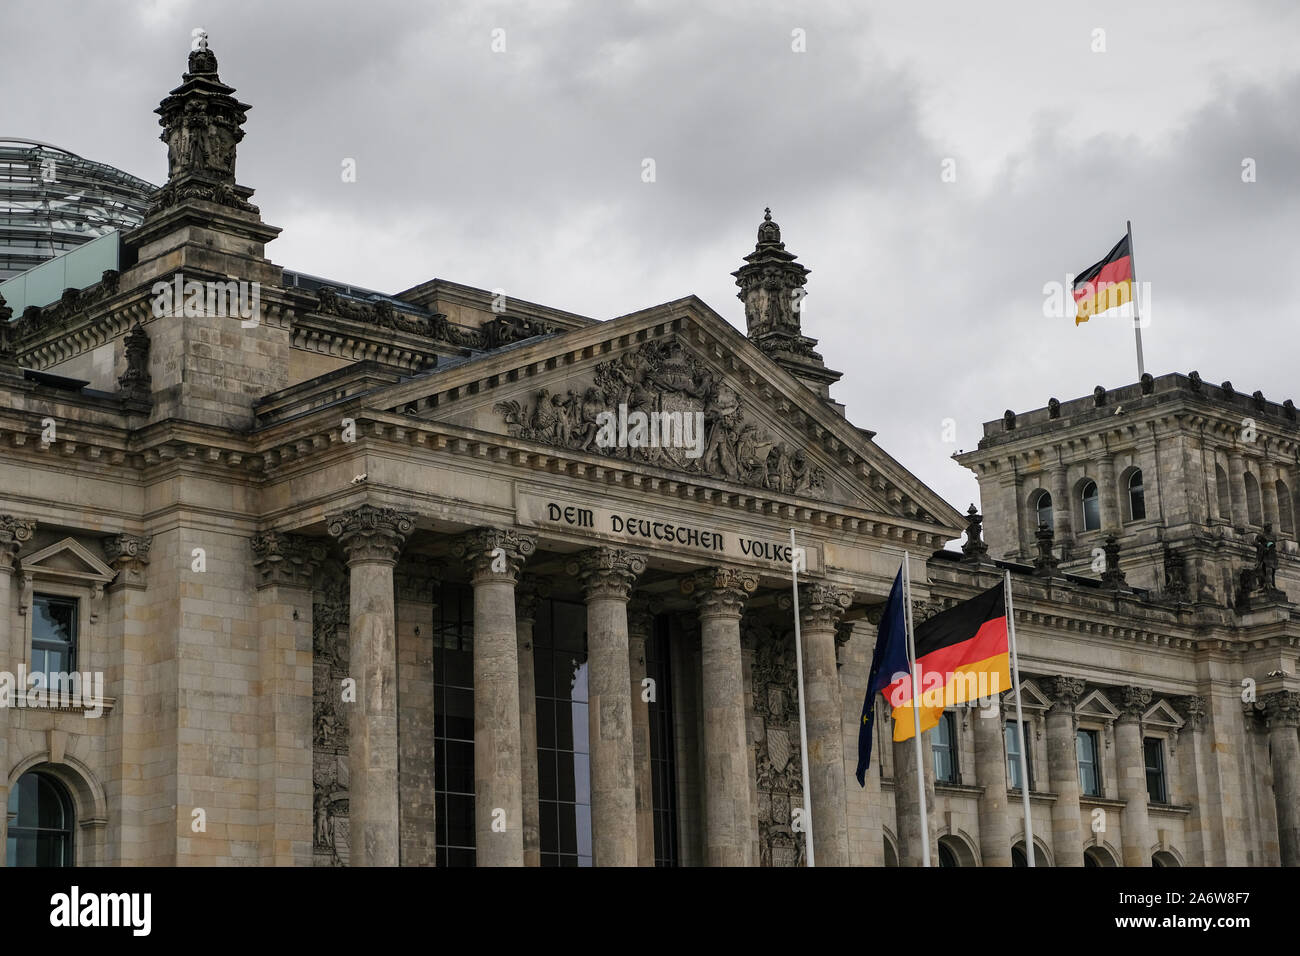 Berlin famous historic reichstag facade with german flags over cloudy sky,symbol Stock Photo